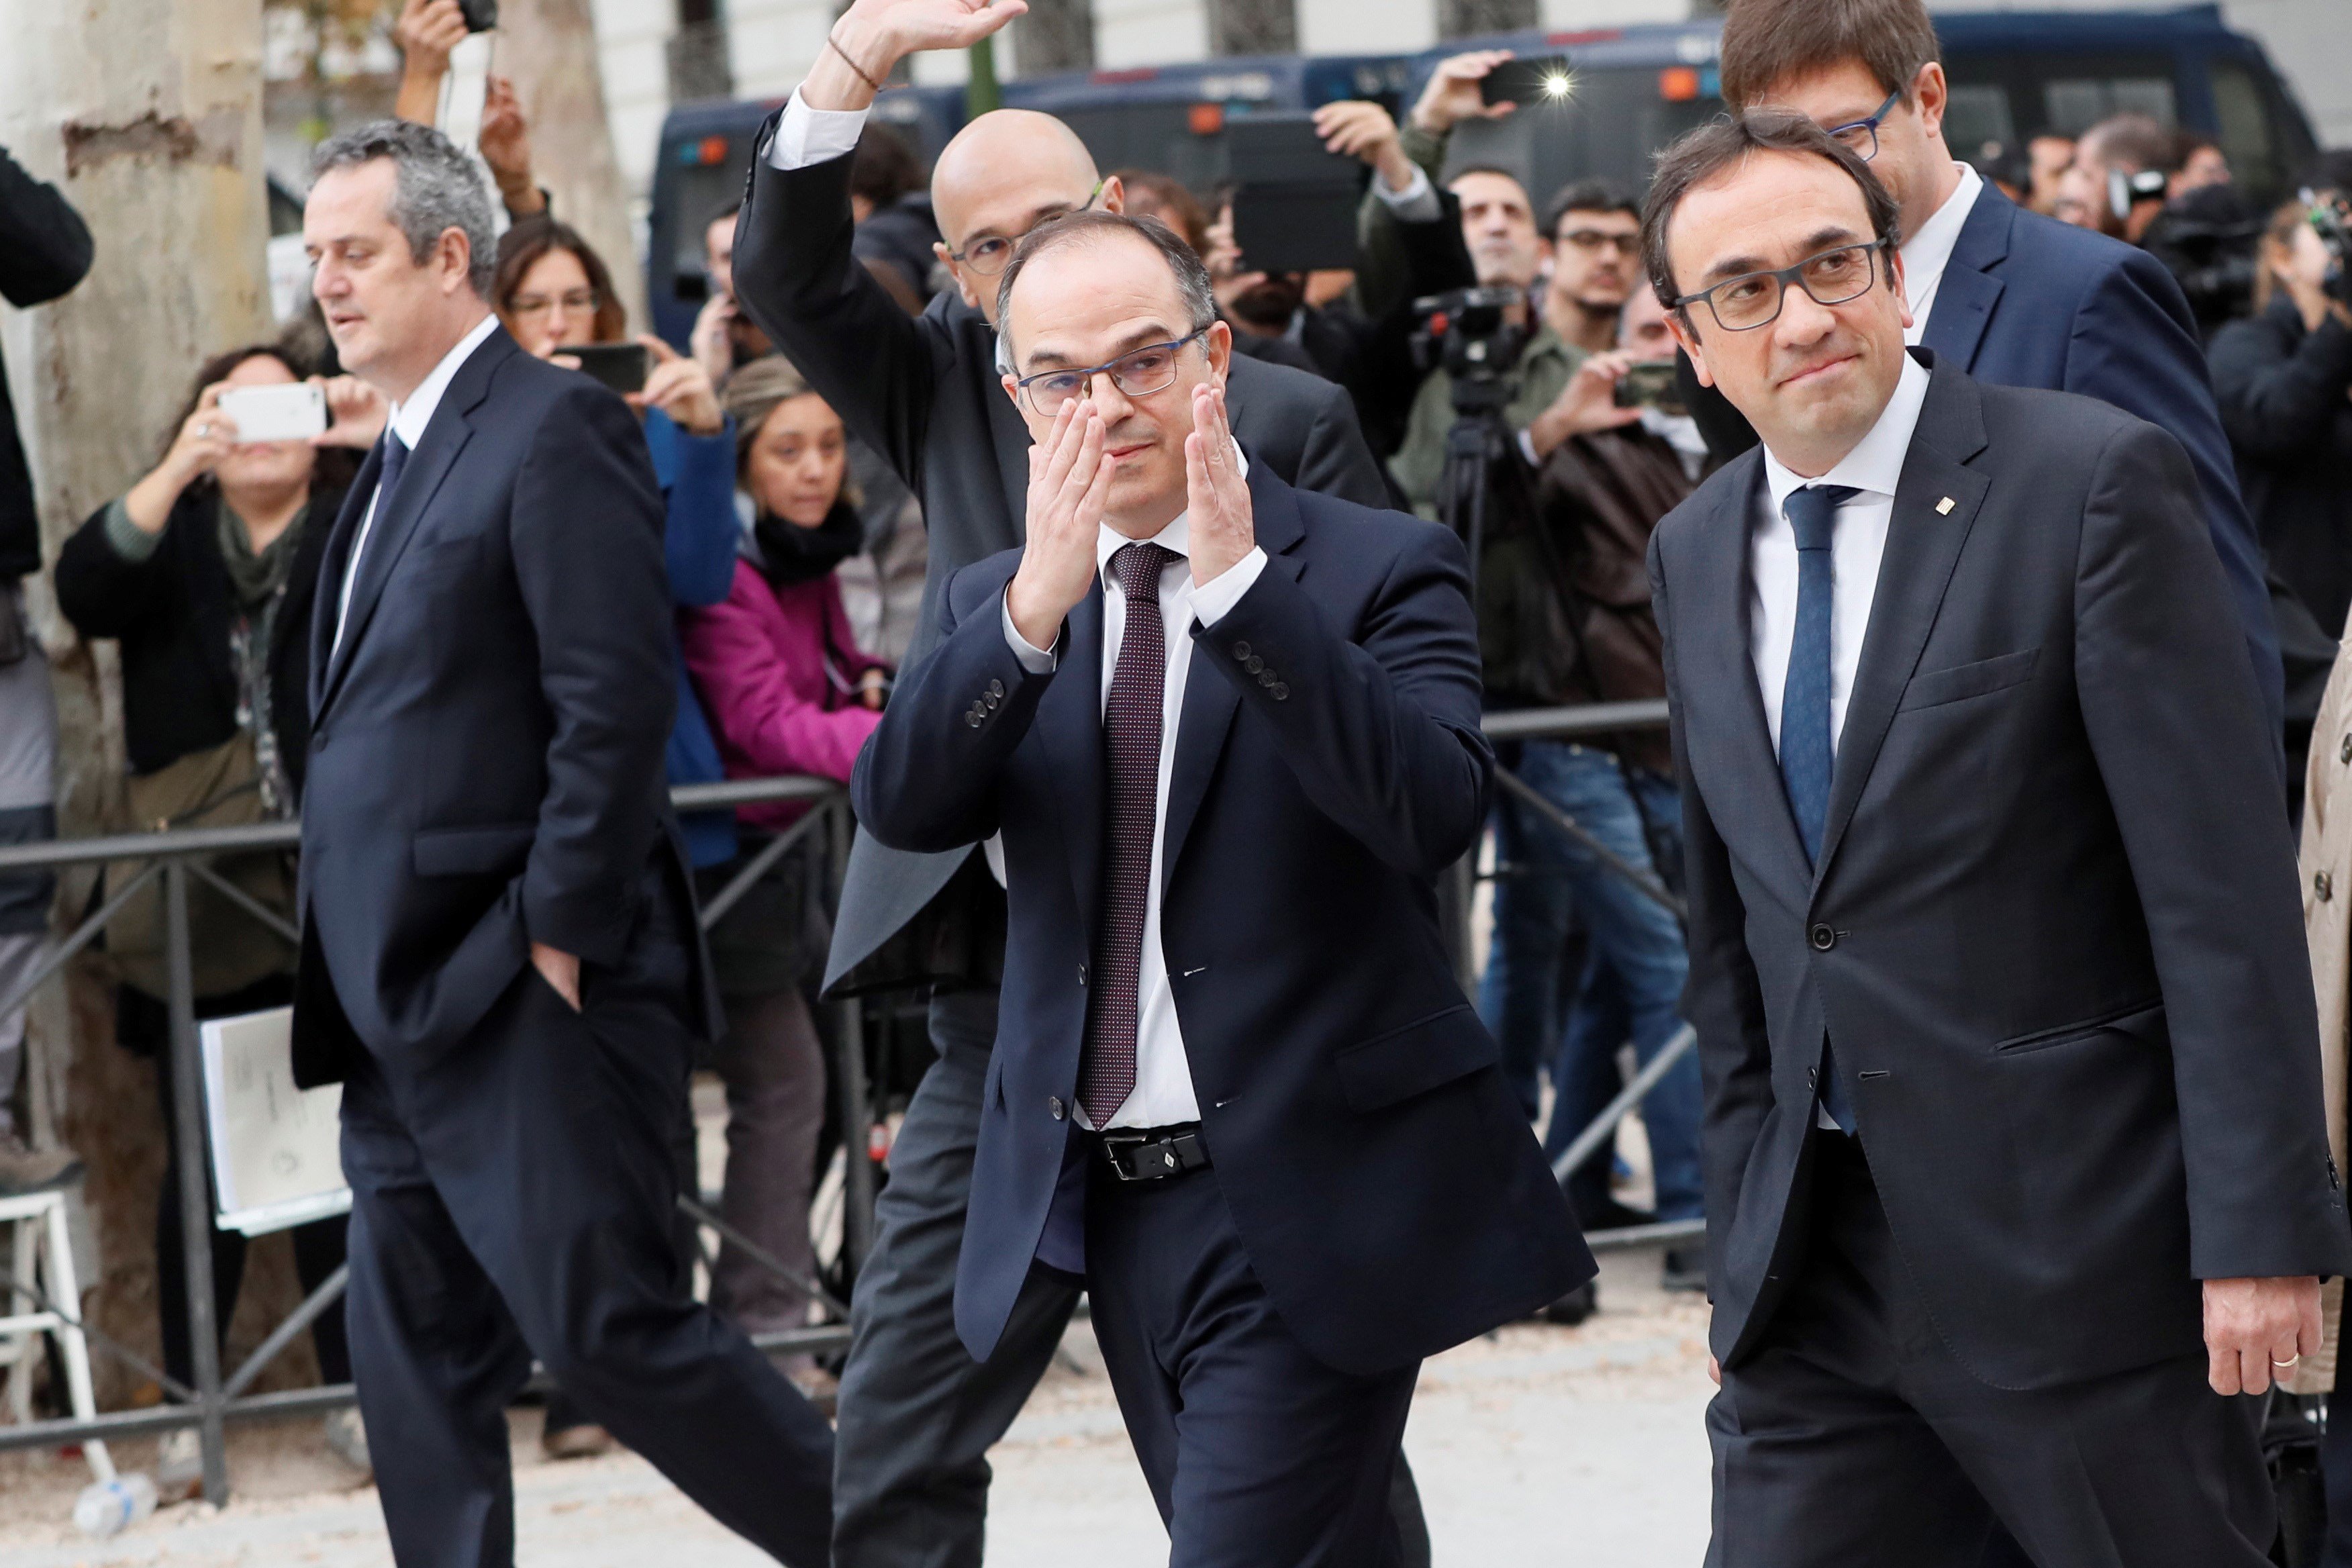 Ministers accept intervention in Catalan autonomy to appeal preventive detention